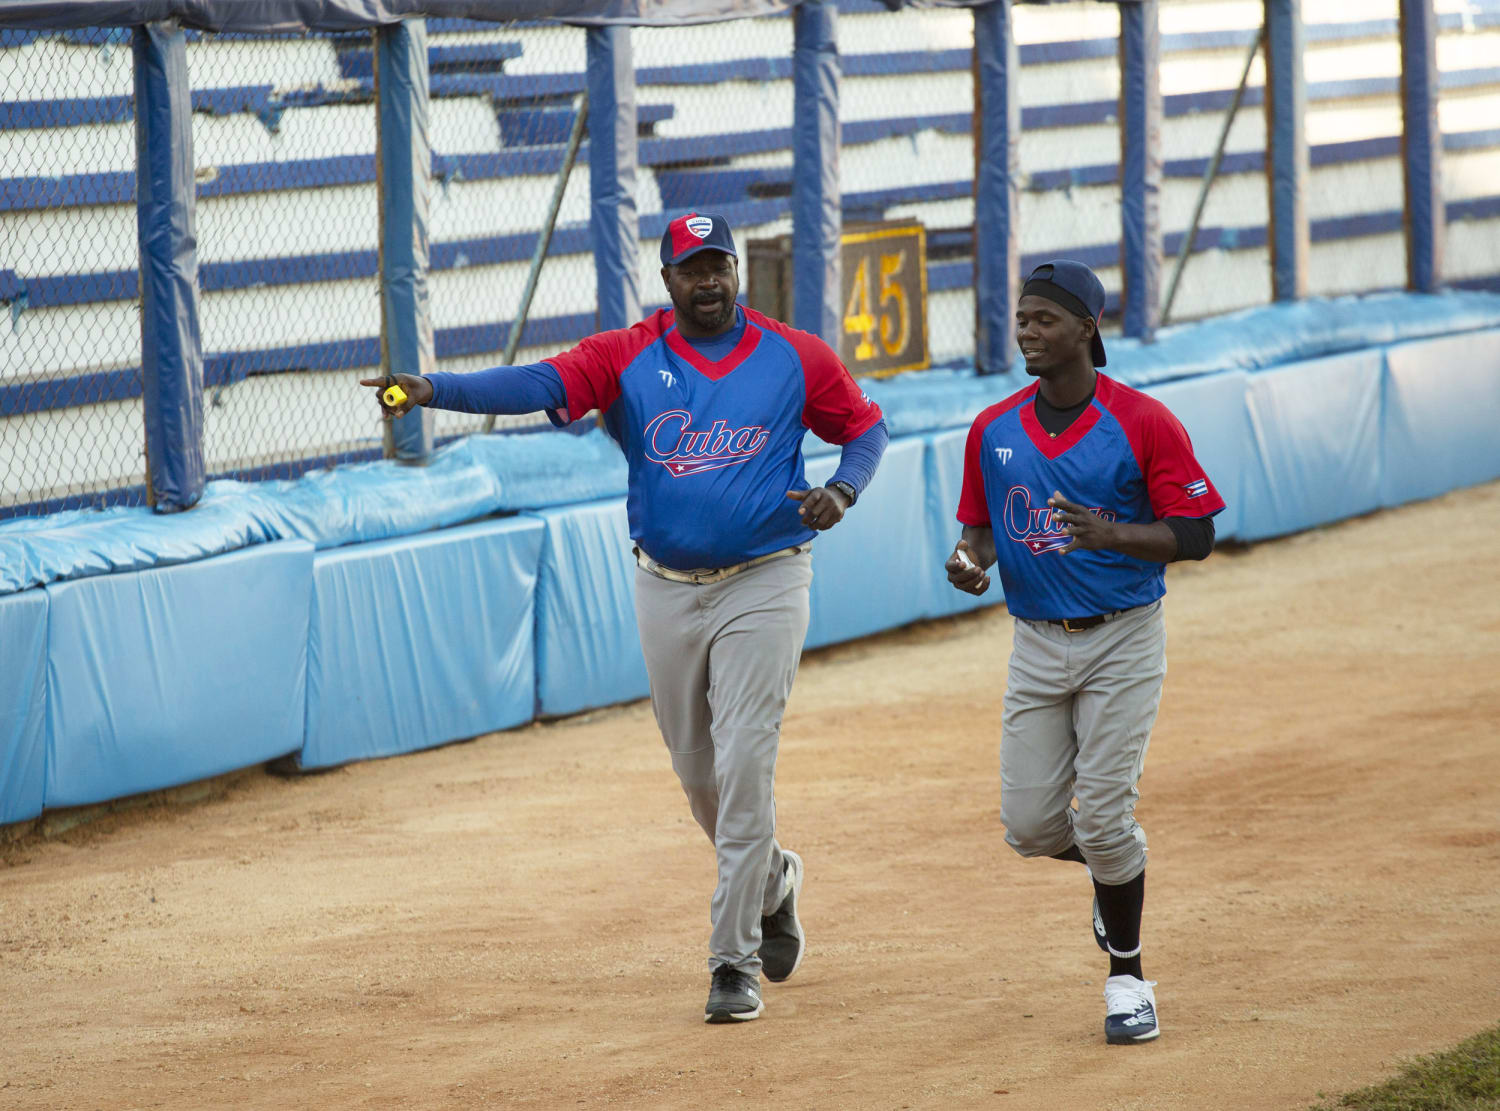 Best Cuban baseball players: All-time lineup of stars from Cuba